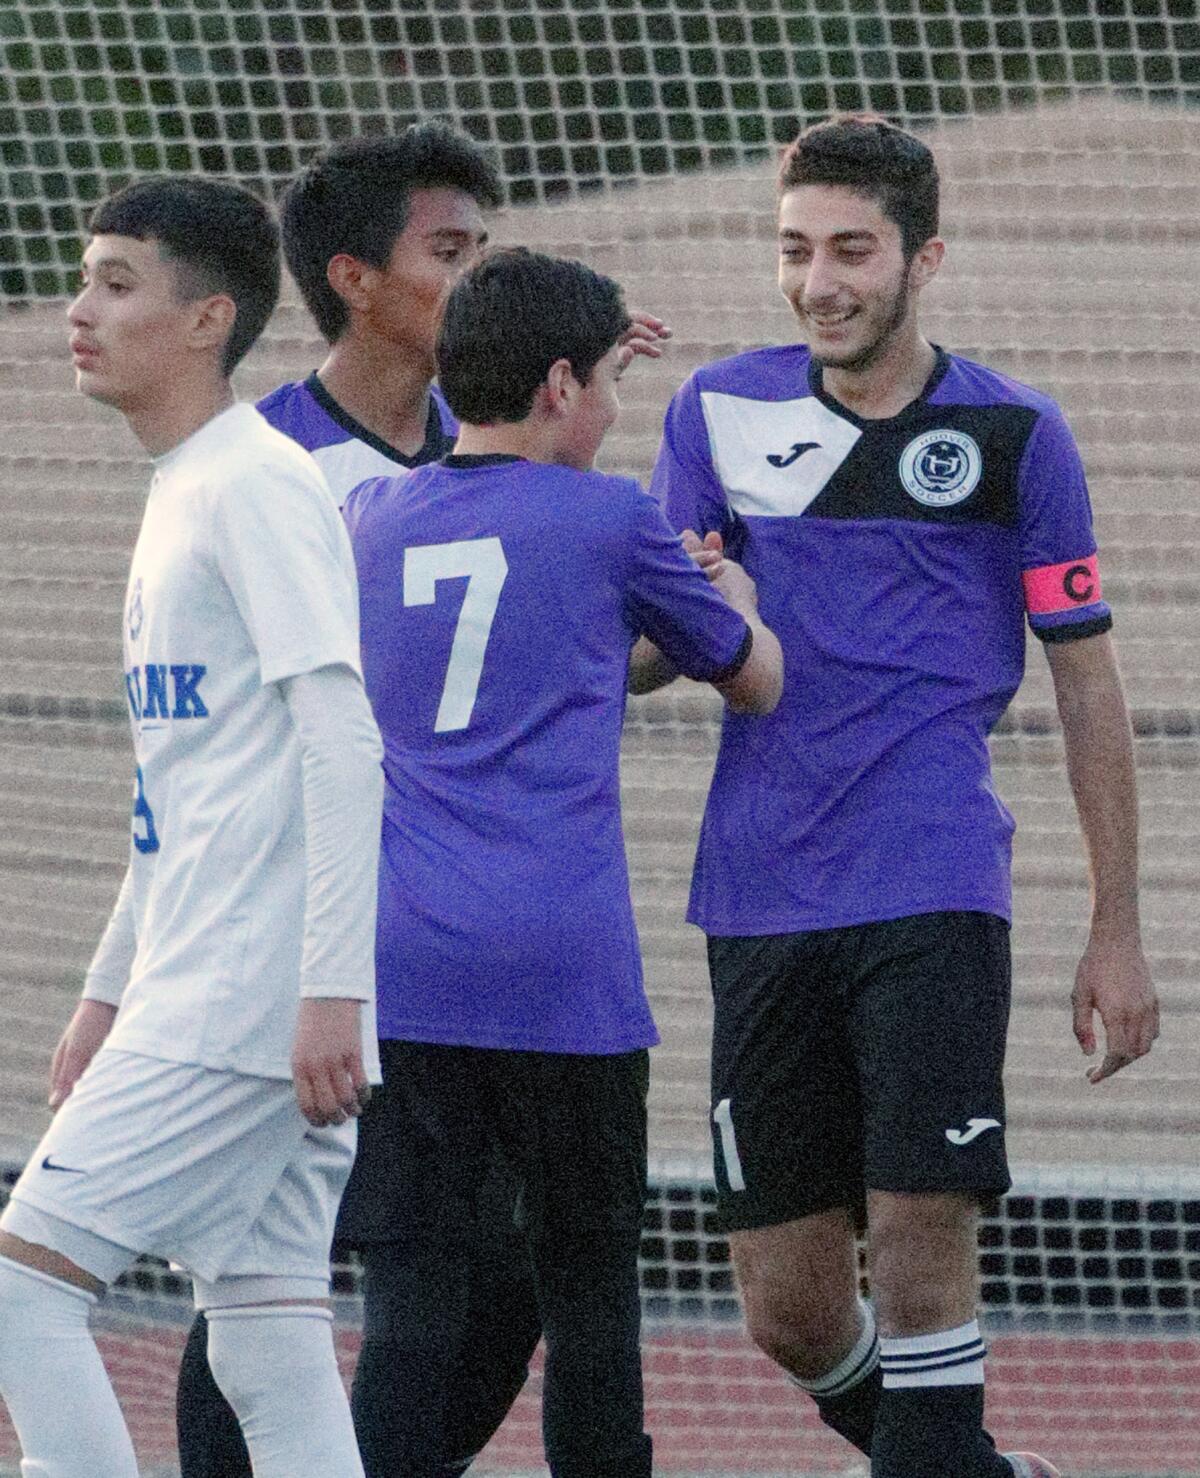 Hoover’s Kevin Mirzakhanian is congratulated by teammates after scoring his third goal of the game in a Pacific League boys' soccer game Friday against Burbank.